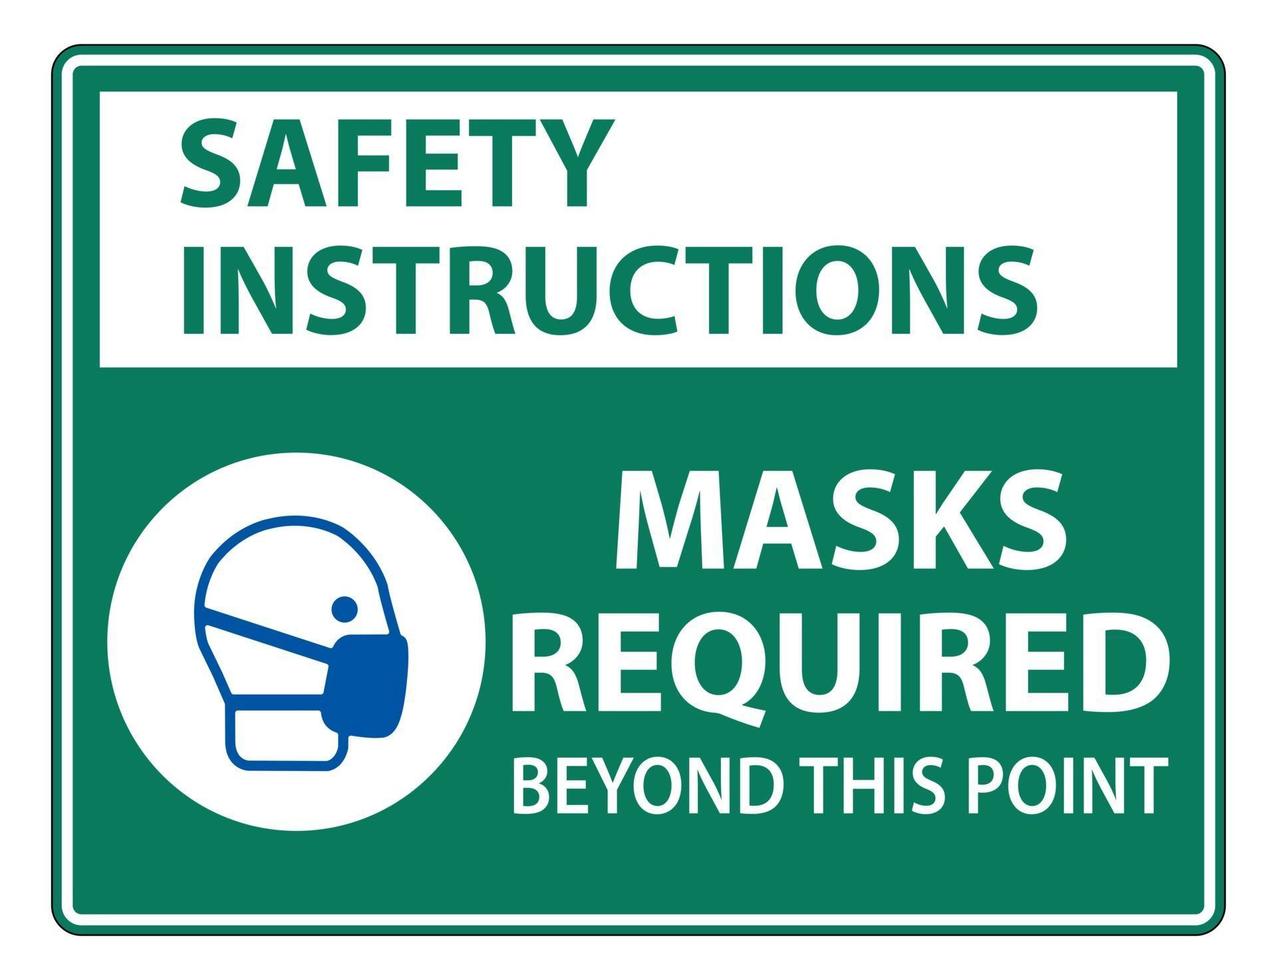 Safety Instructions Masks Required Beyond This Point Sign vector